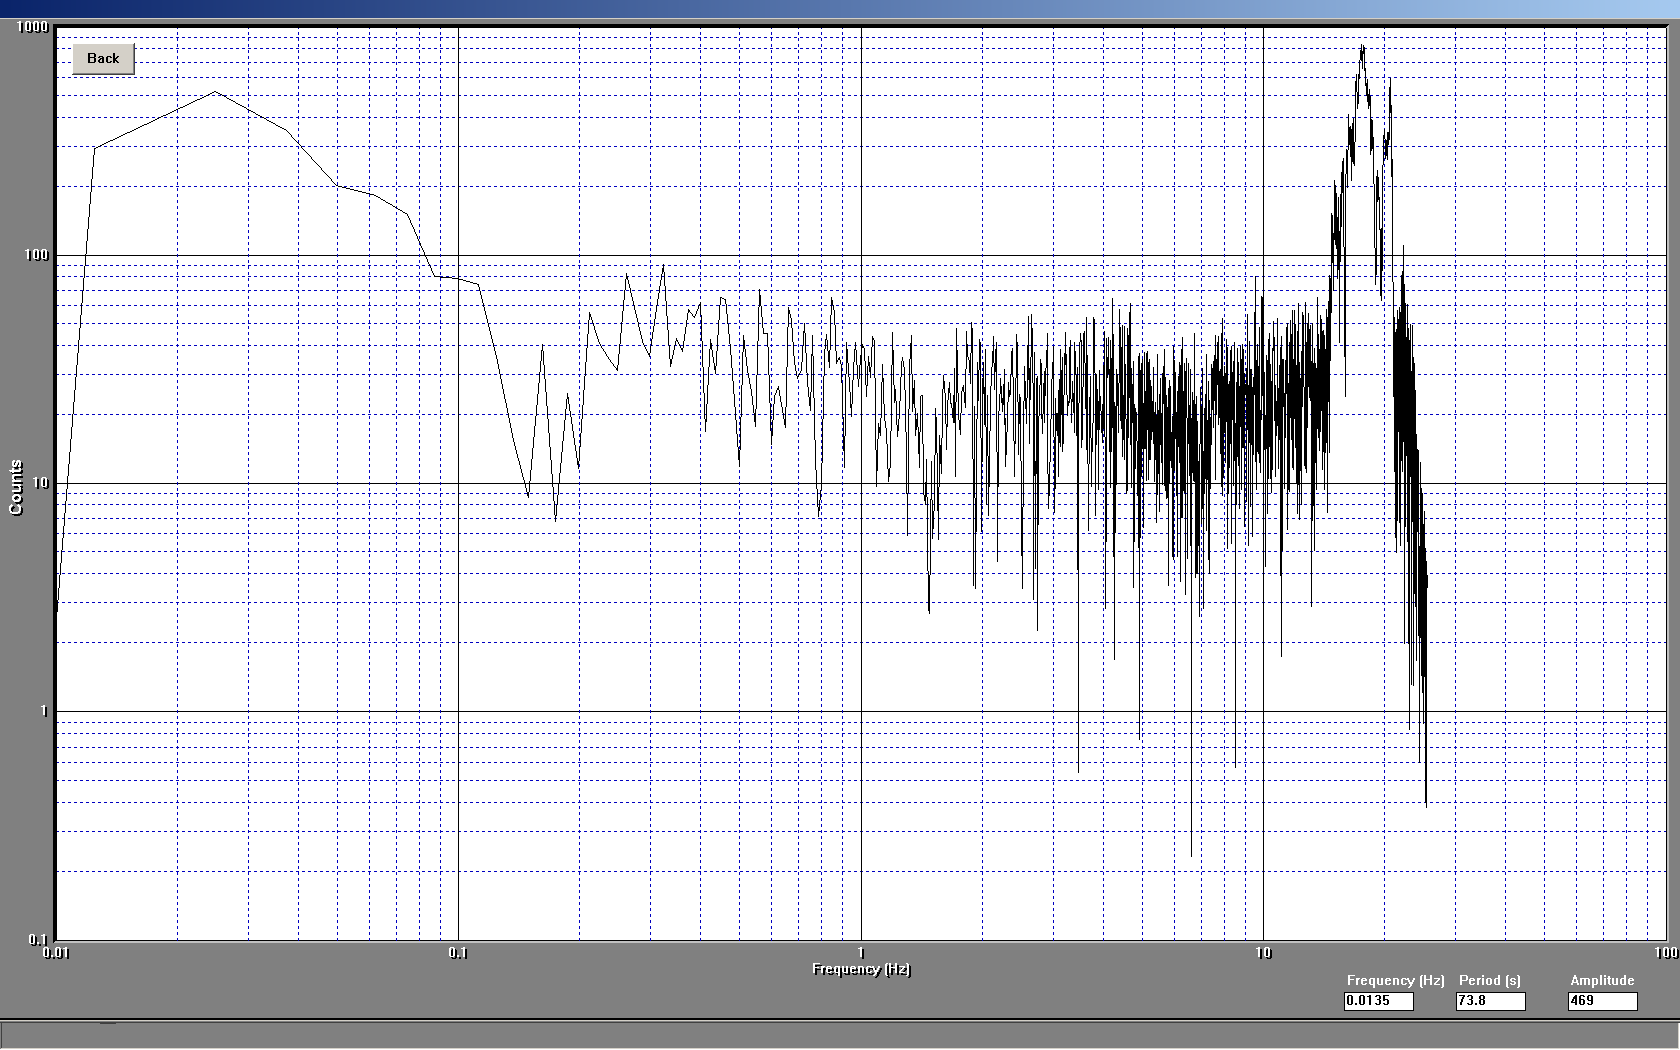 power spectra of helicopter infrasound on INFRA20 monitor